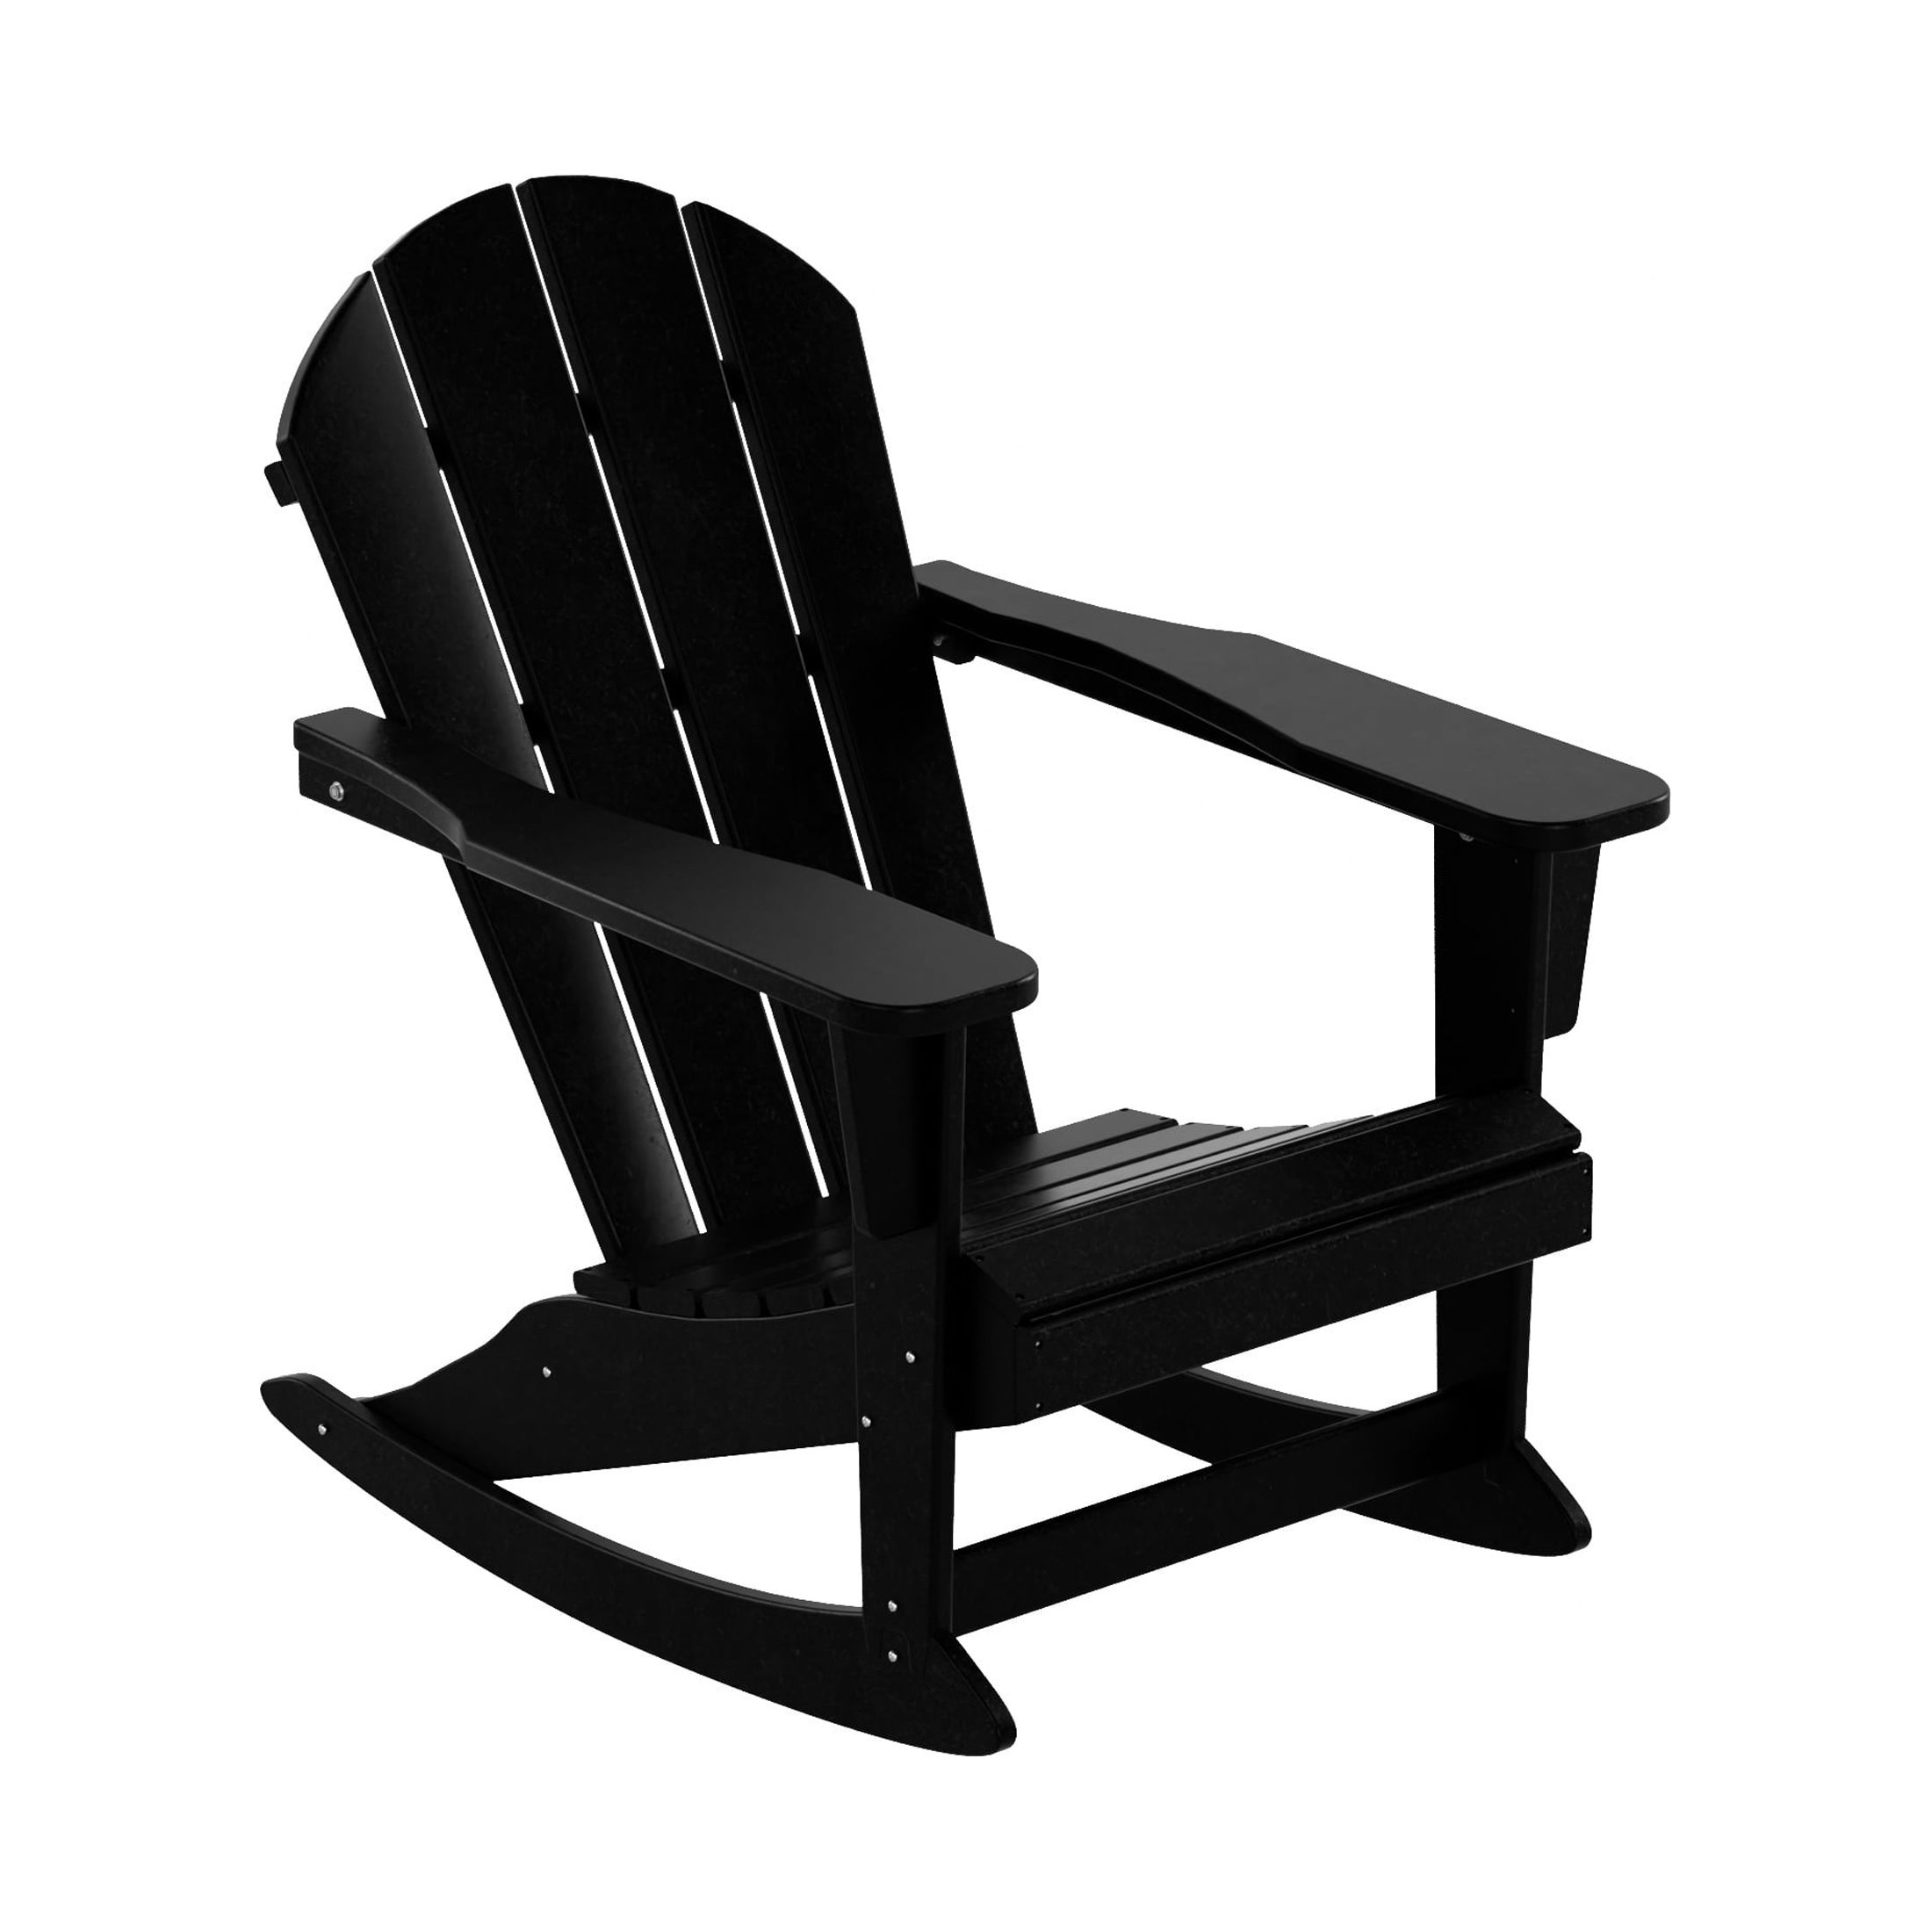 WestinTrends Malibu 2 Piece Outdoor Rocking Chair Set, All Weather Poly Lumber Porch Patio Adirondack Rocking Chair with Side Table, Black - image 4 of 8